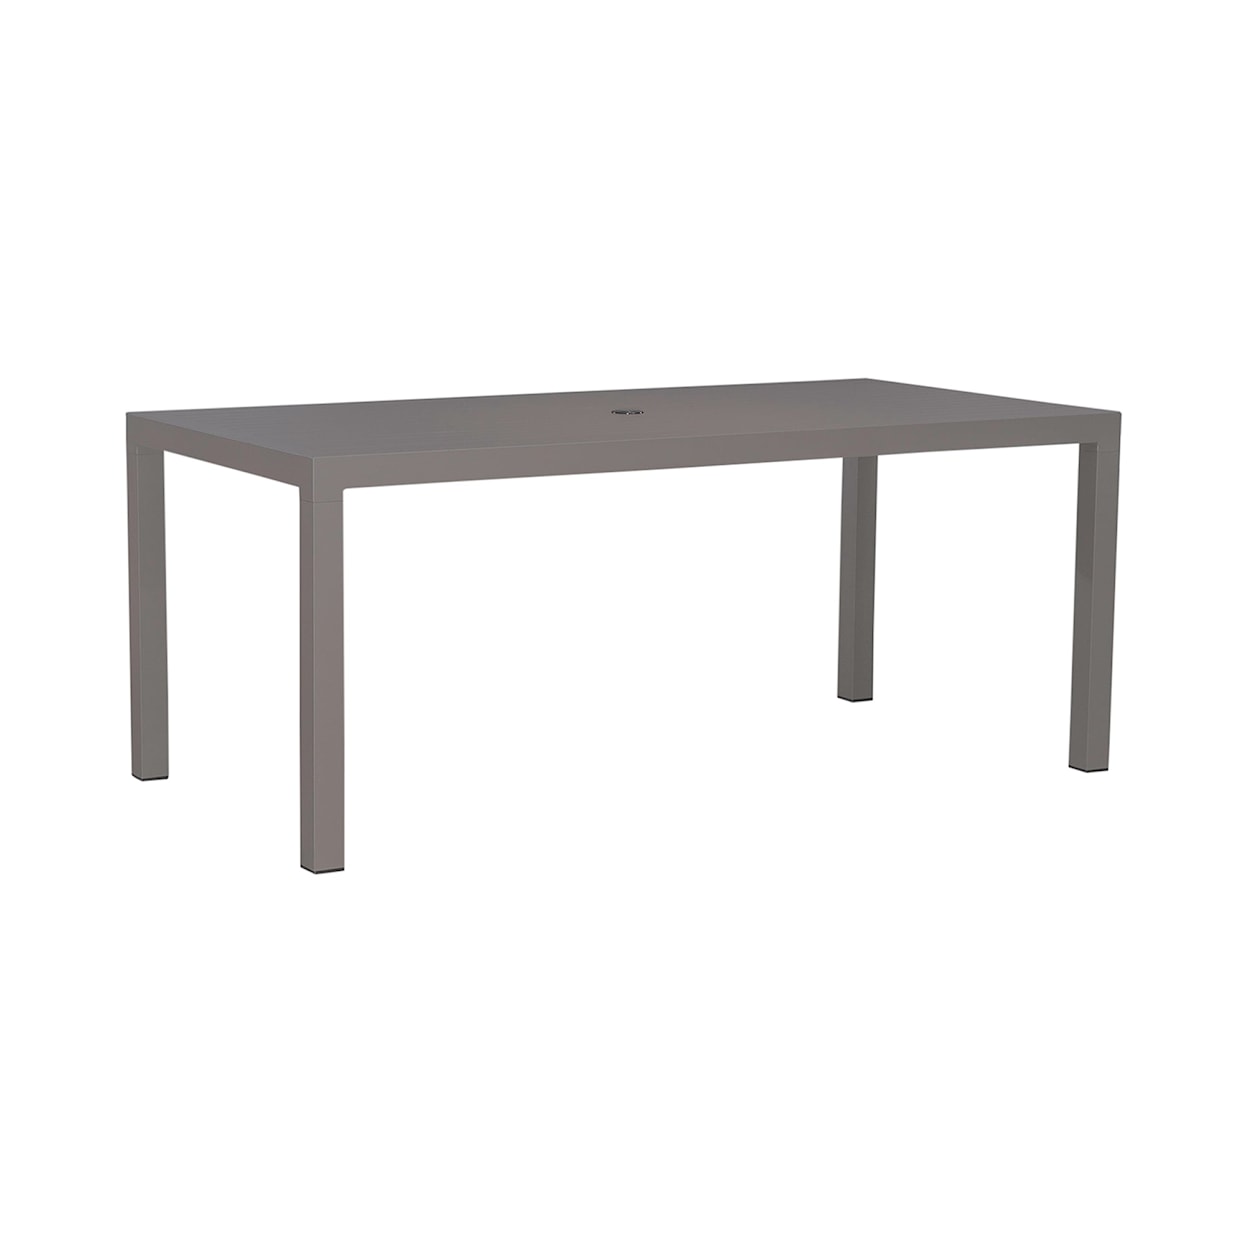 Liberty Furniture Plantation Key Outdoor Dining Table